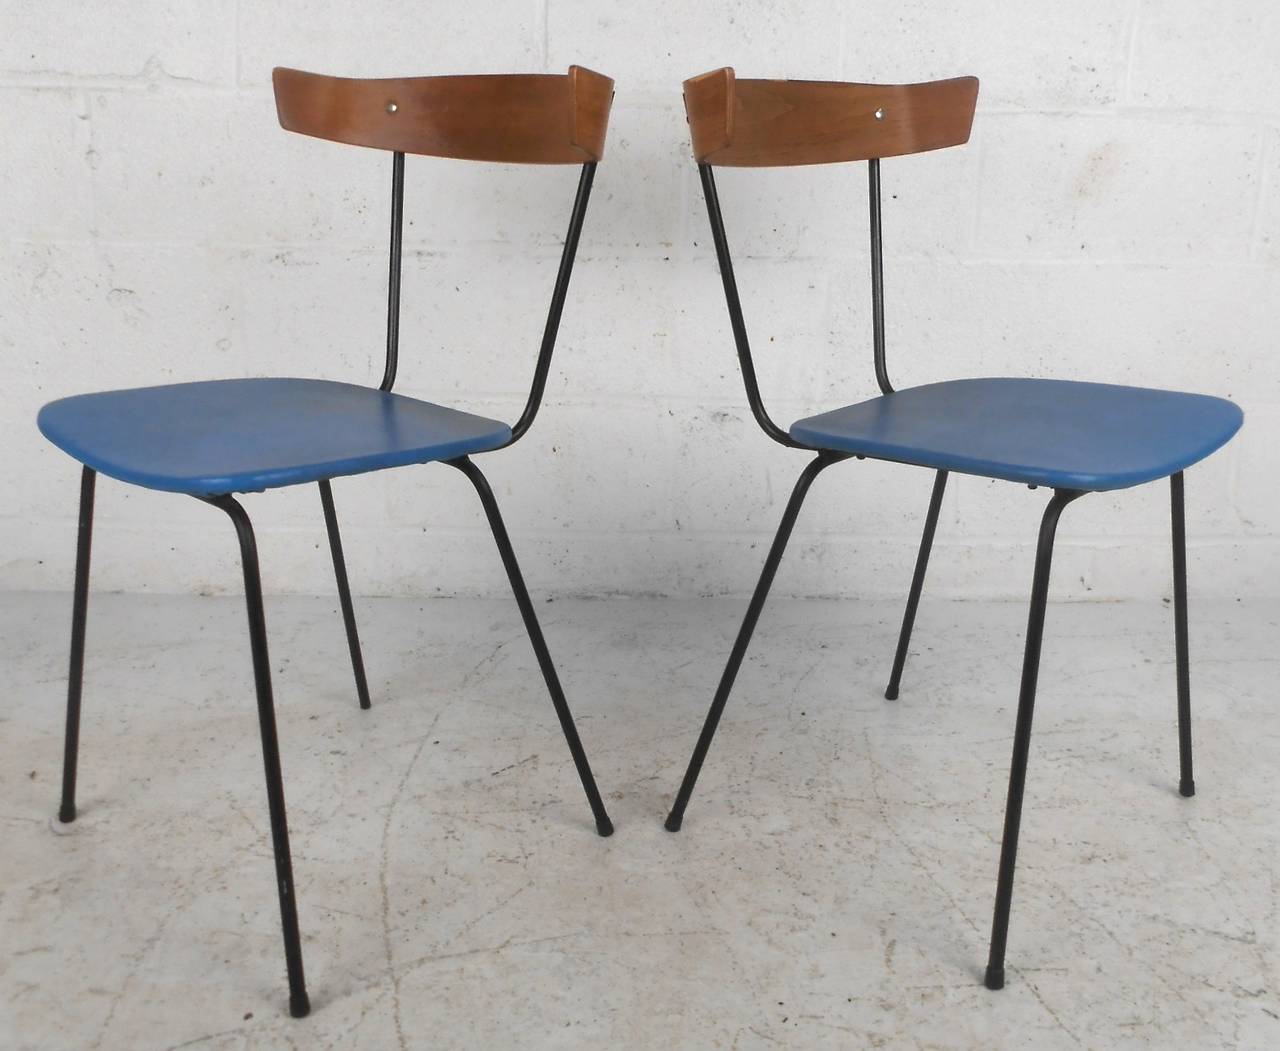 Pair of Mid-Century Modern Paul McCobb Attributed Bentwood Dining Chairs 1